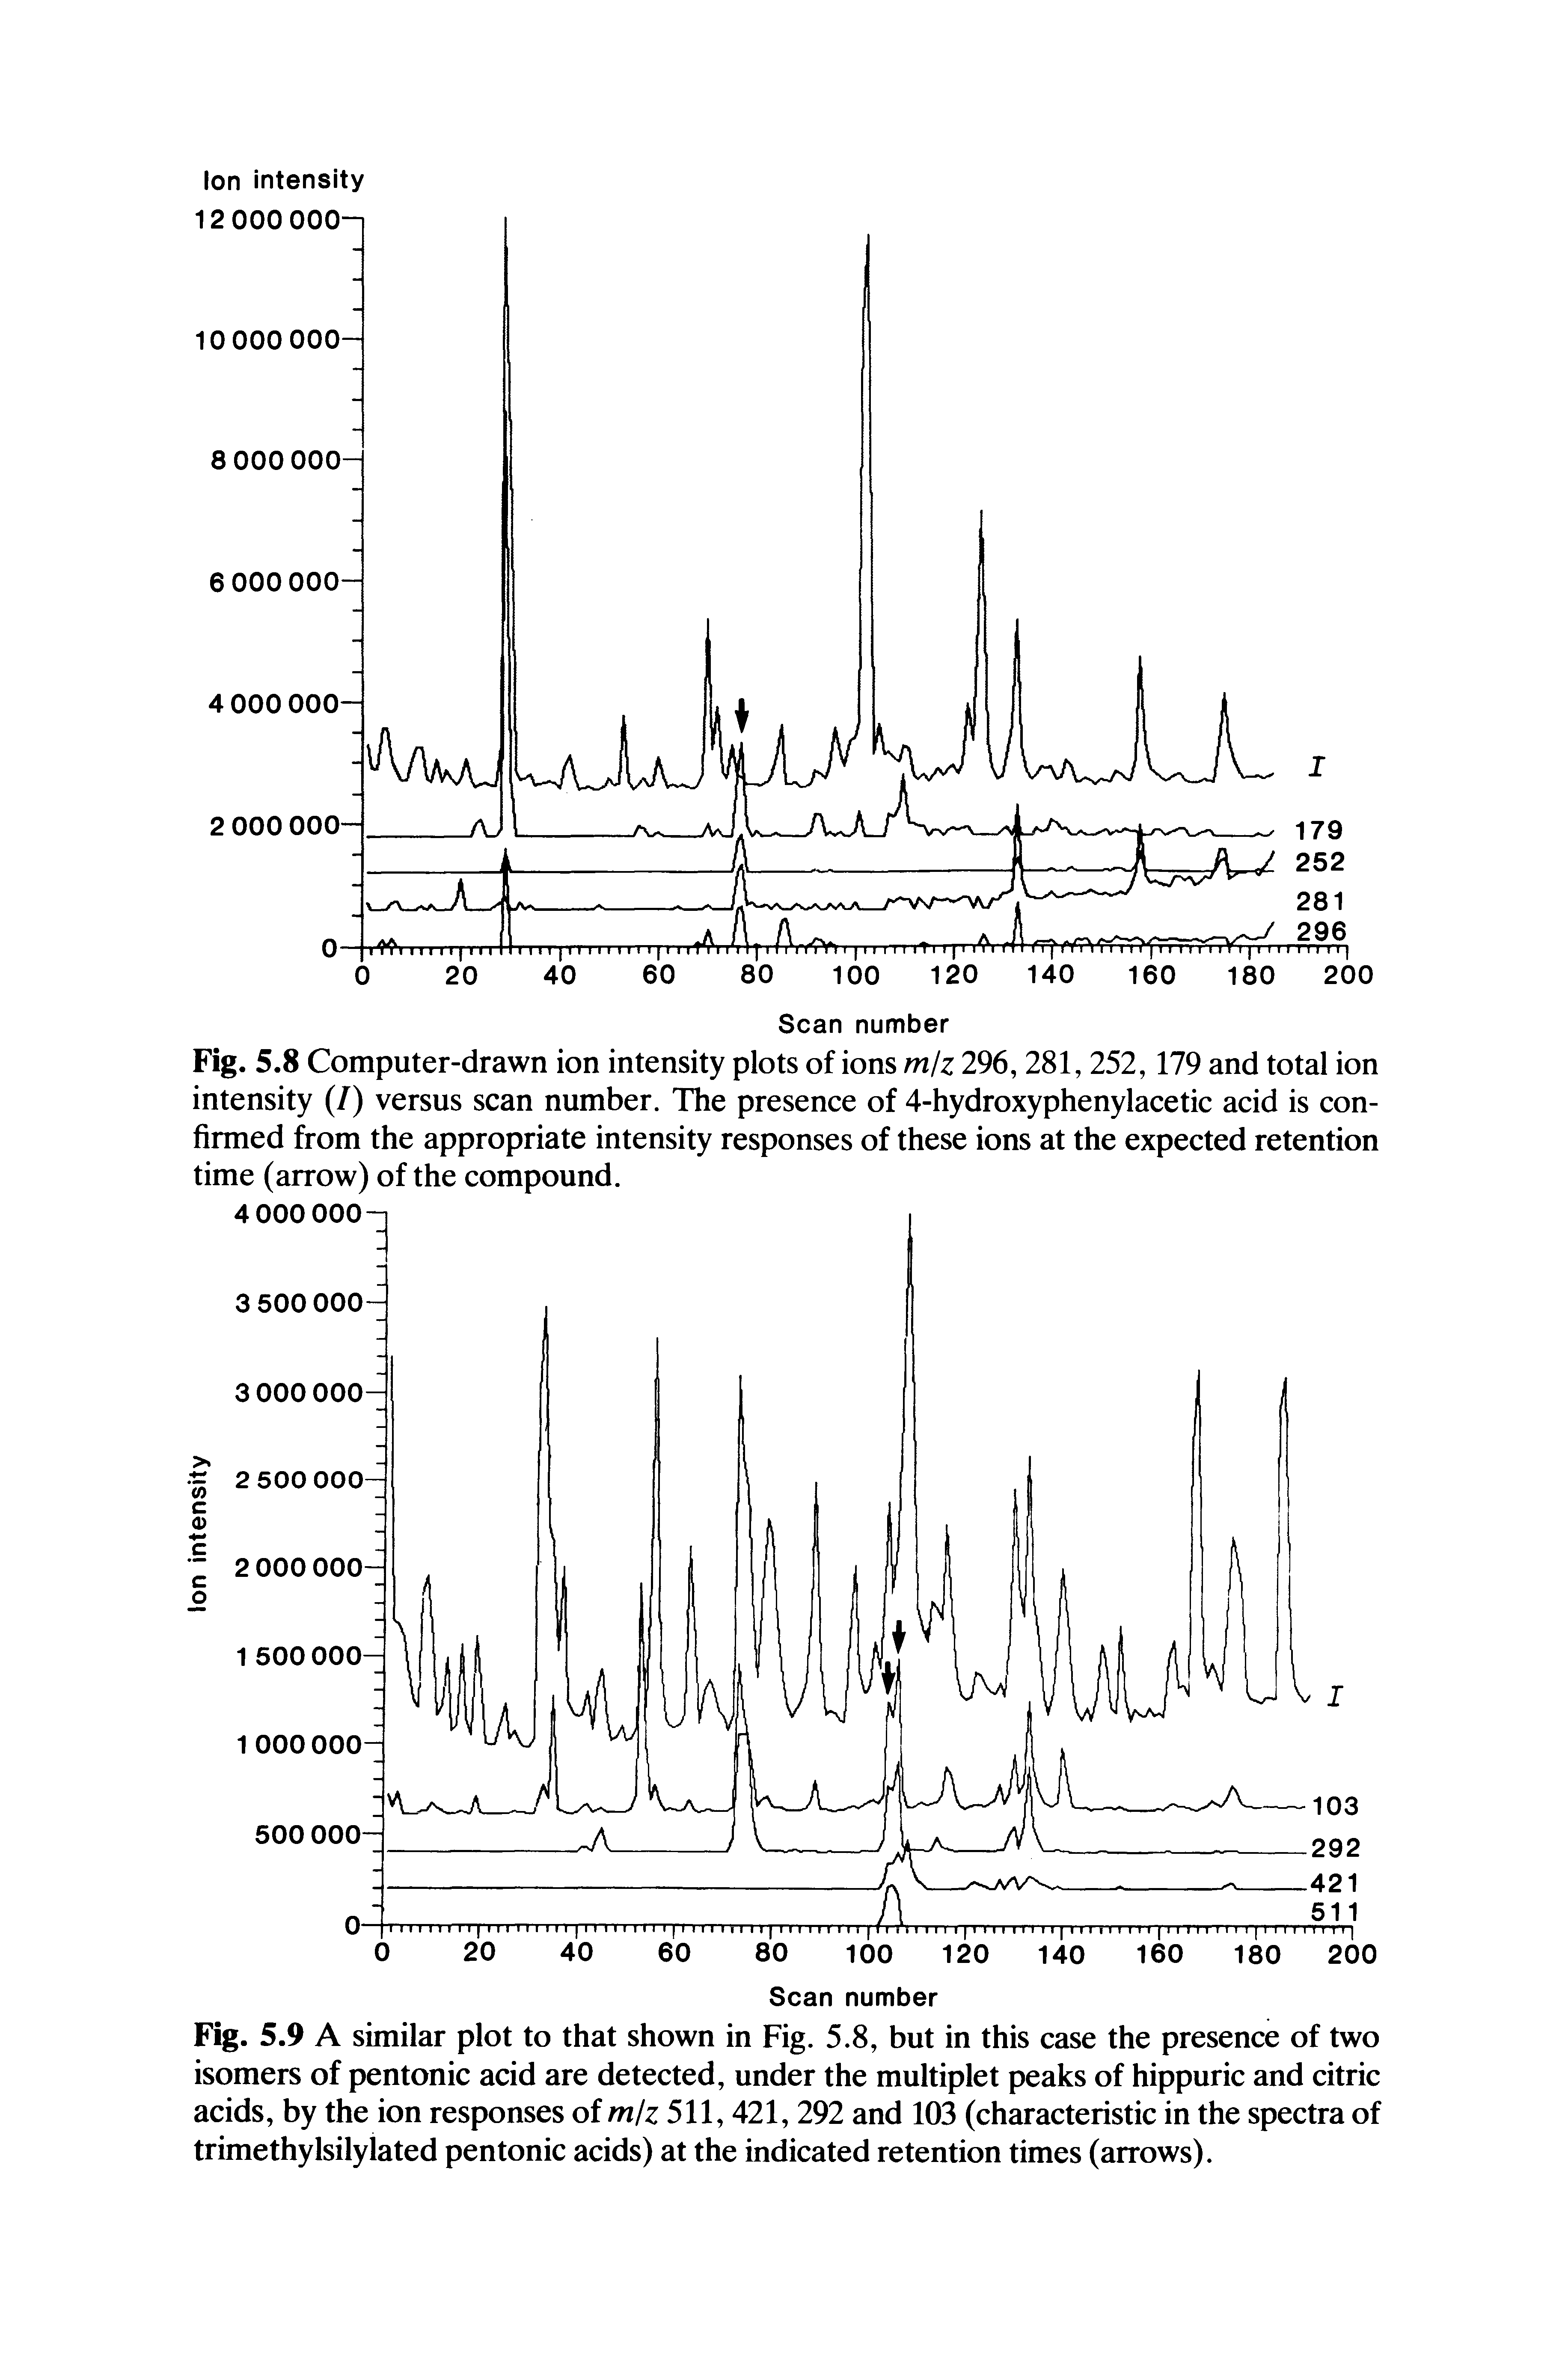 Fig. 5.8 Computer-drawn ion intensity plots of ions mh 296, 281, 252,179 and total ion intensity (/) versus scan number. The presence of 4-hydroxyphenylacetic acid is confirmed from the appropriate intensity responses of these ions at the expected retention time (arrow) of the compound.